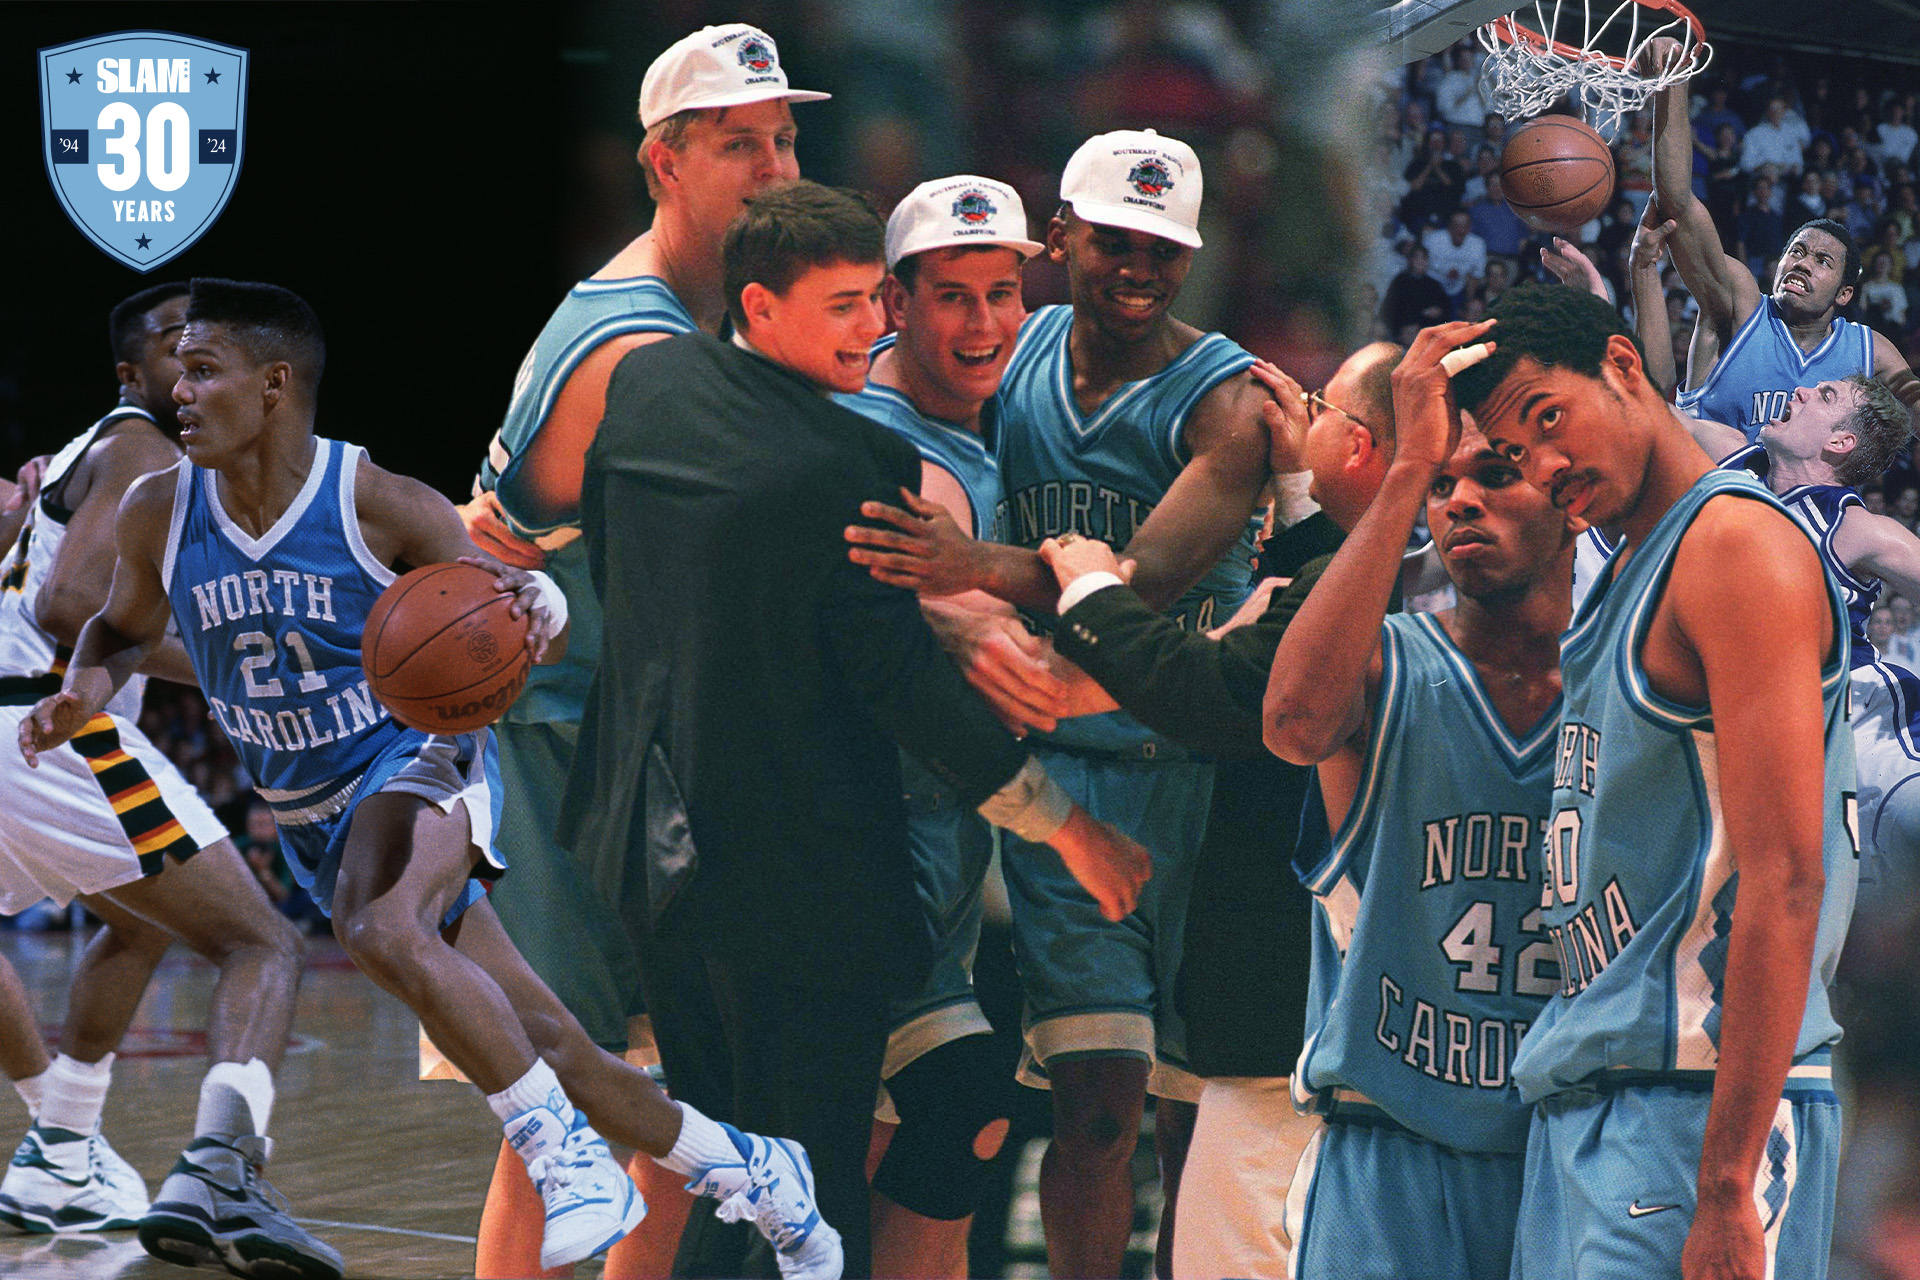 The 30 Most Influential NCAA Men's Basketball Teams of SLAM’s 30 Years: 1994-95 North Carolina